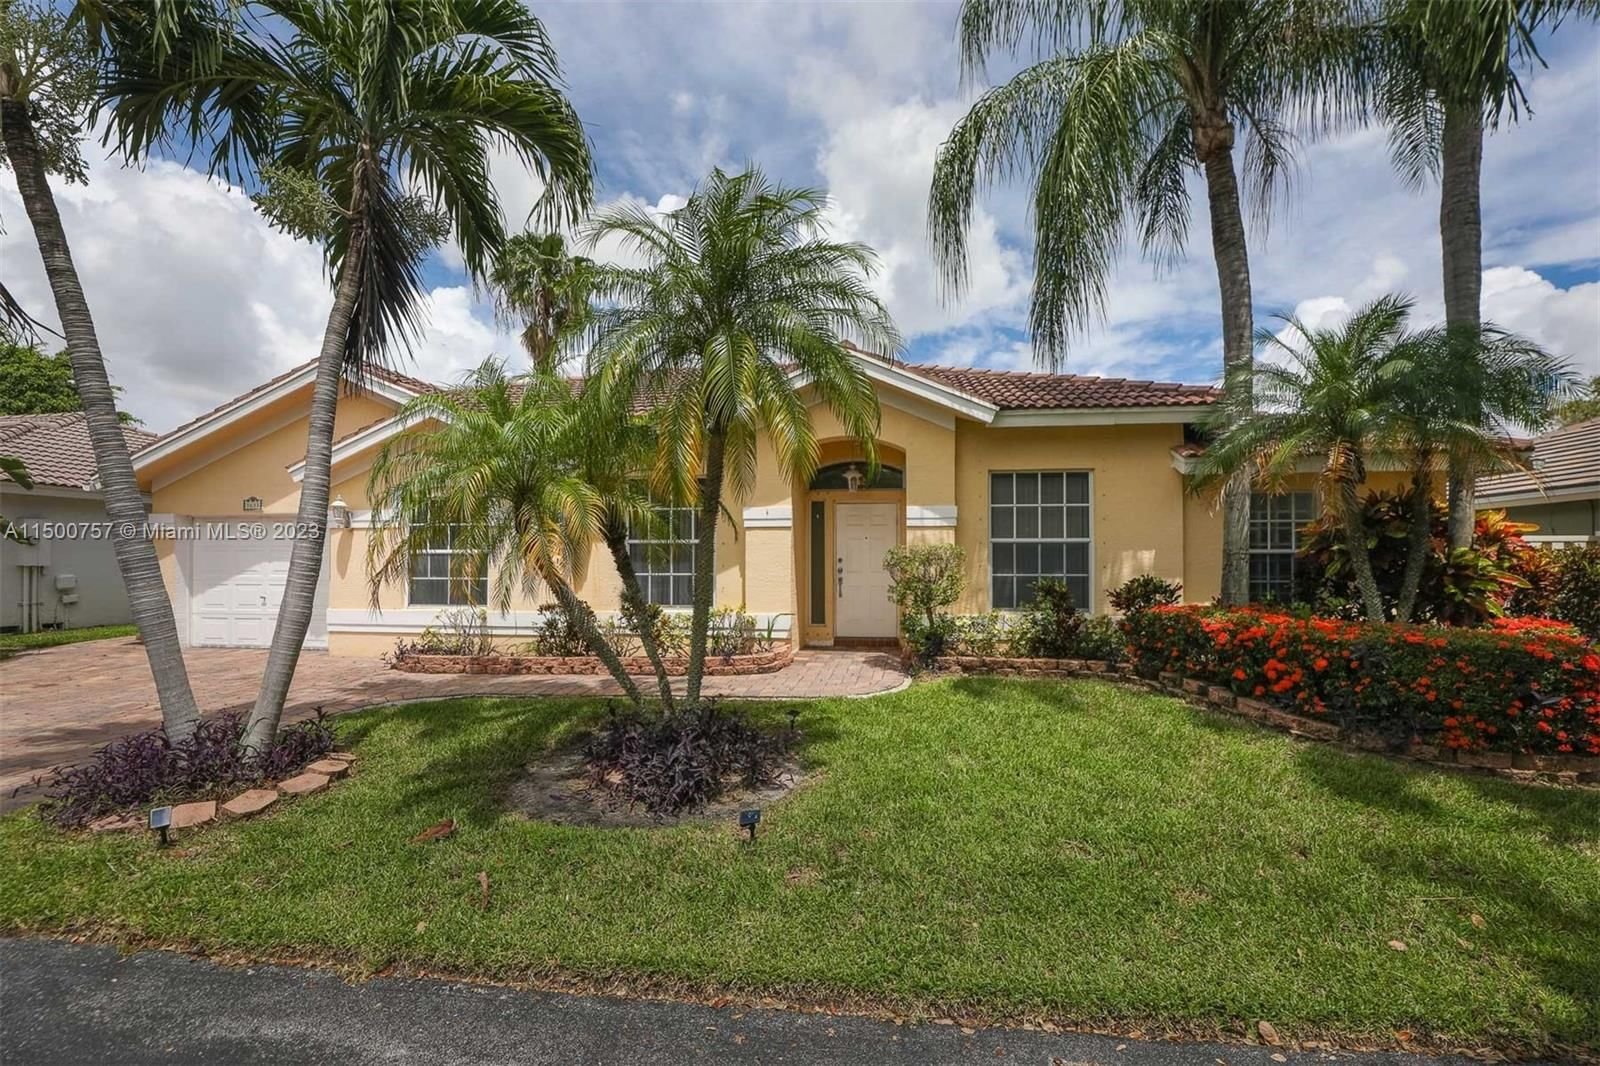 Real estate property located at 3631 Sahara Springs Blvd, Broward County, PALM AIRE OAKS COURSE EST, Pompano Beach, FL